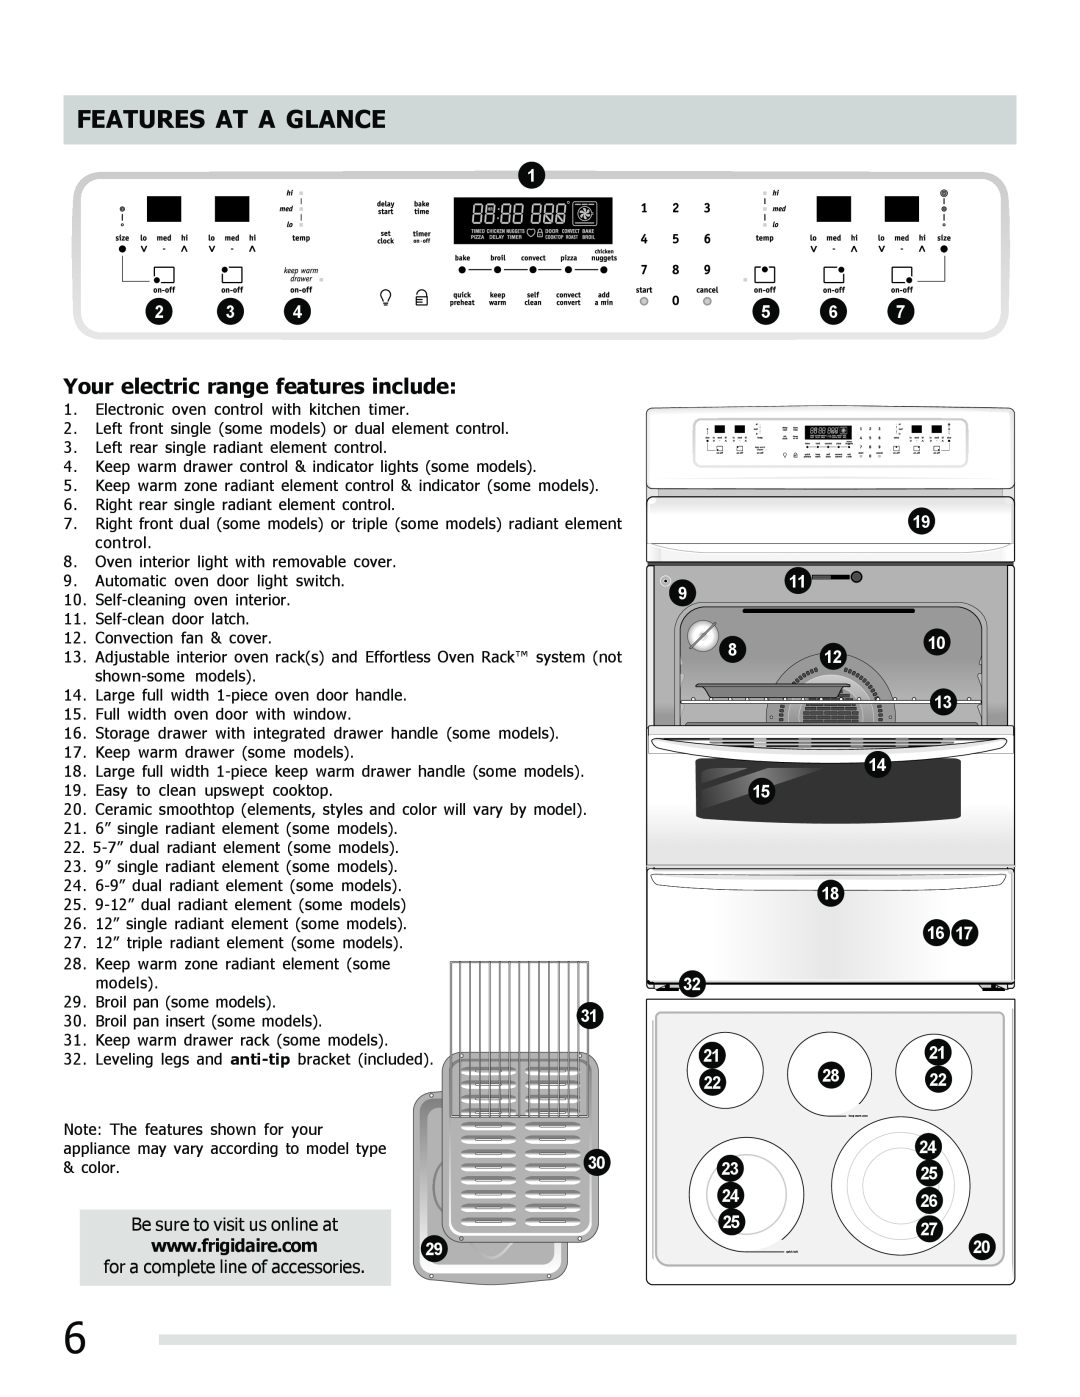 Frigidaire 316902202 important safety instructions Features At A Glance, Your electric range features include 